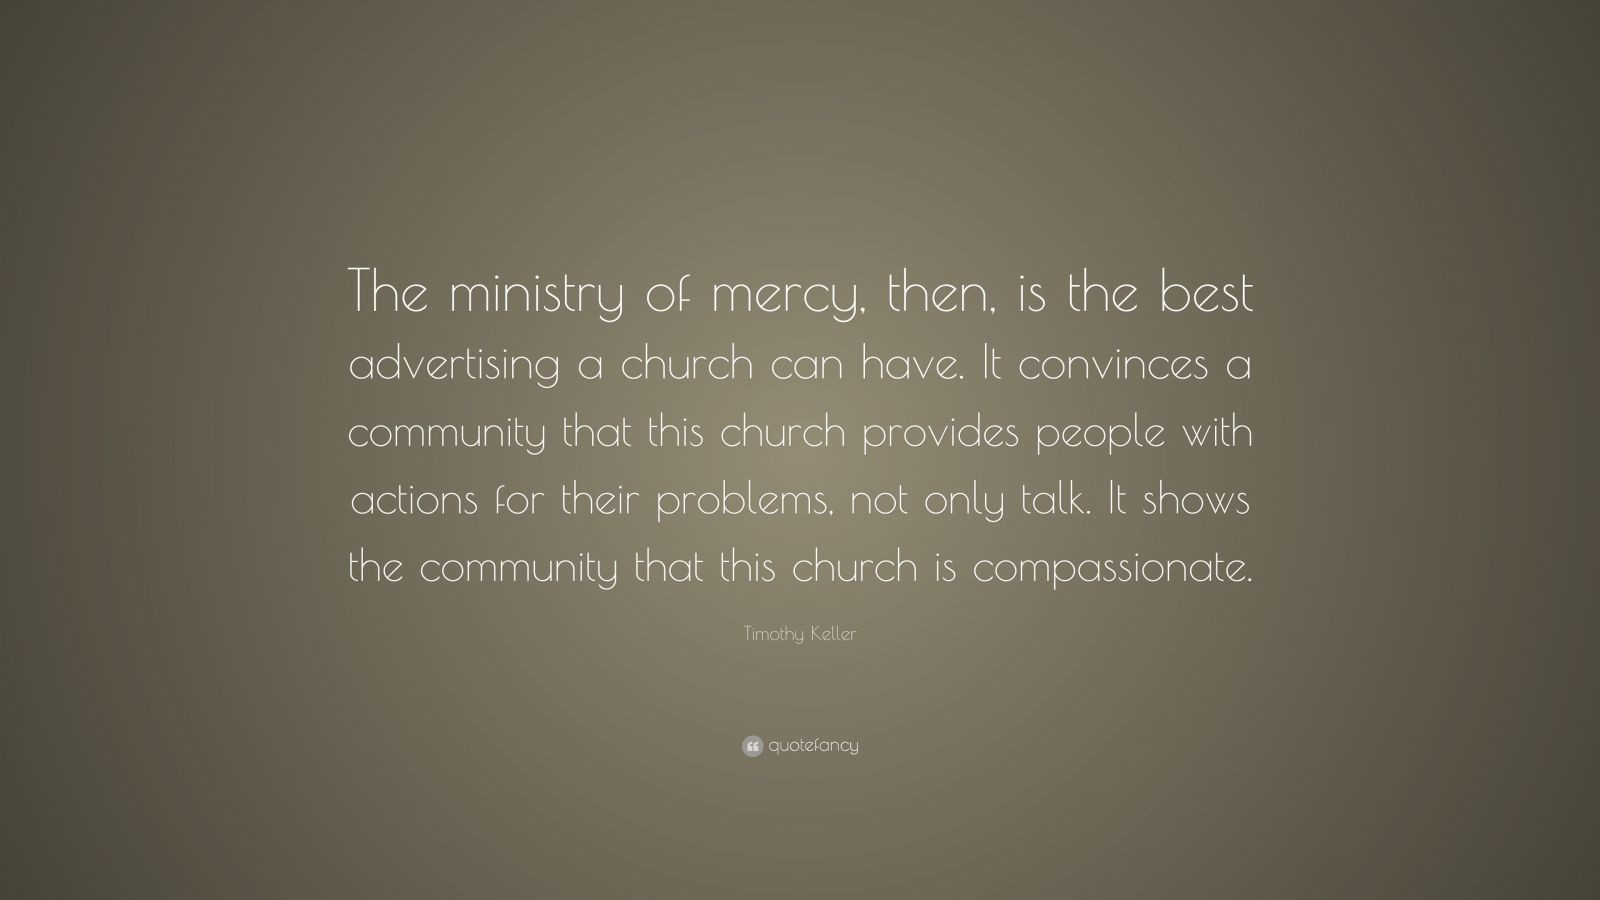 Tim Keller Marriage Quotes
 Timothy Keller Quote “The ministry of mercy then is the